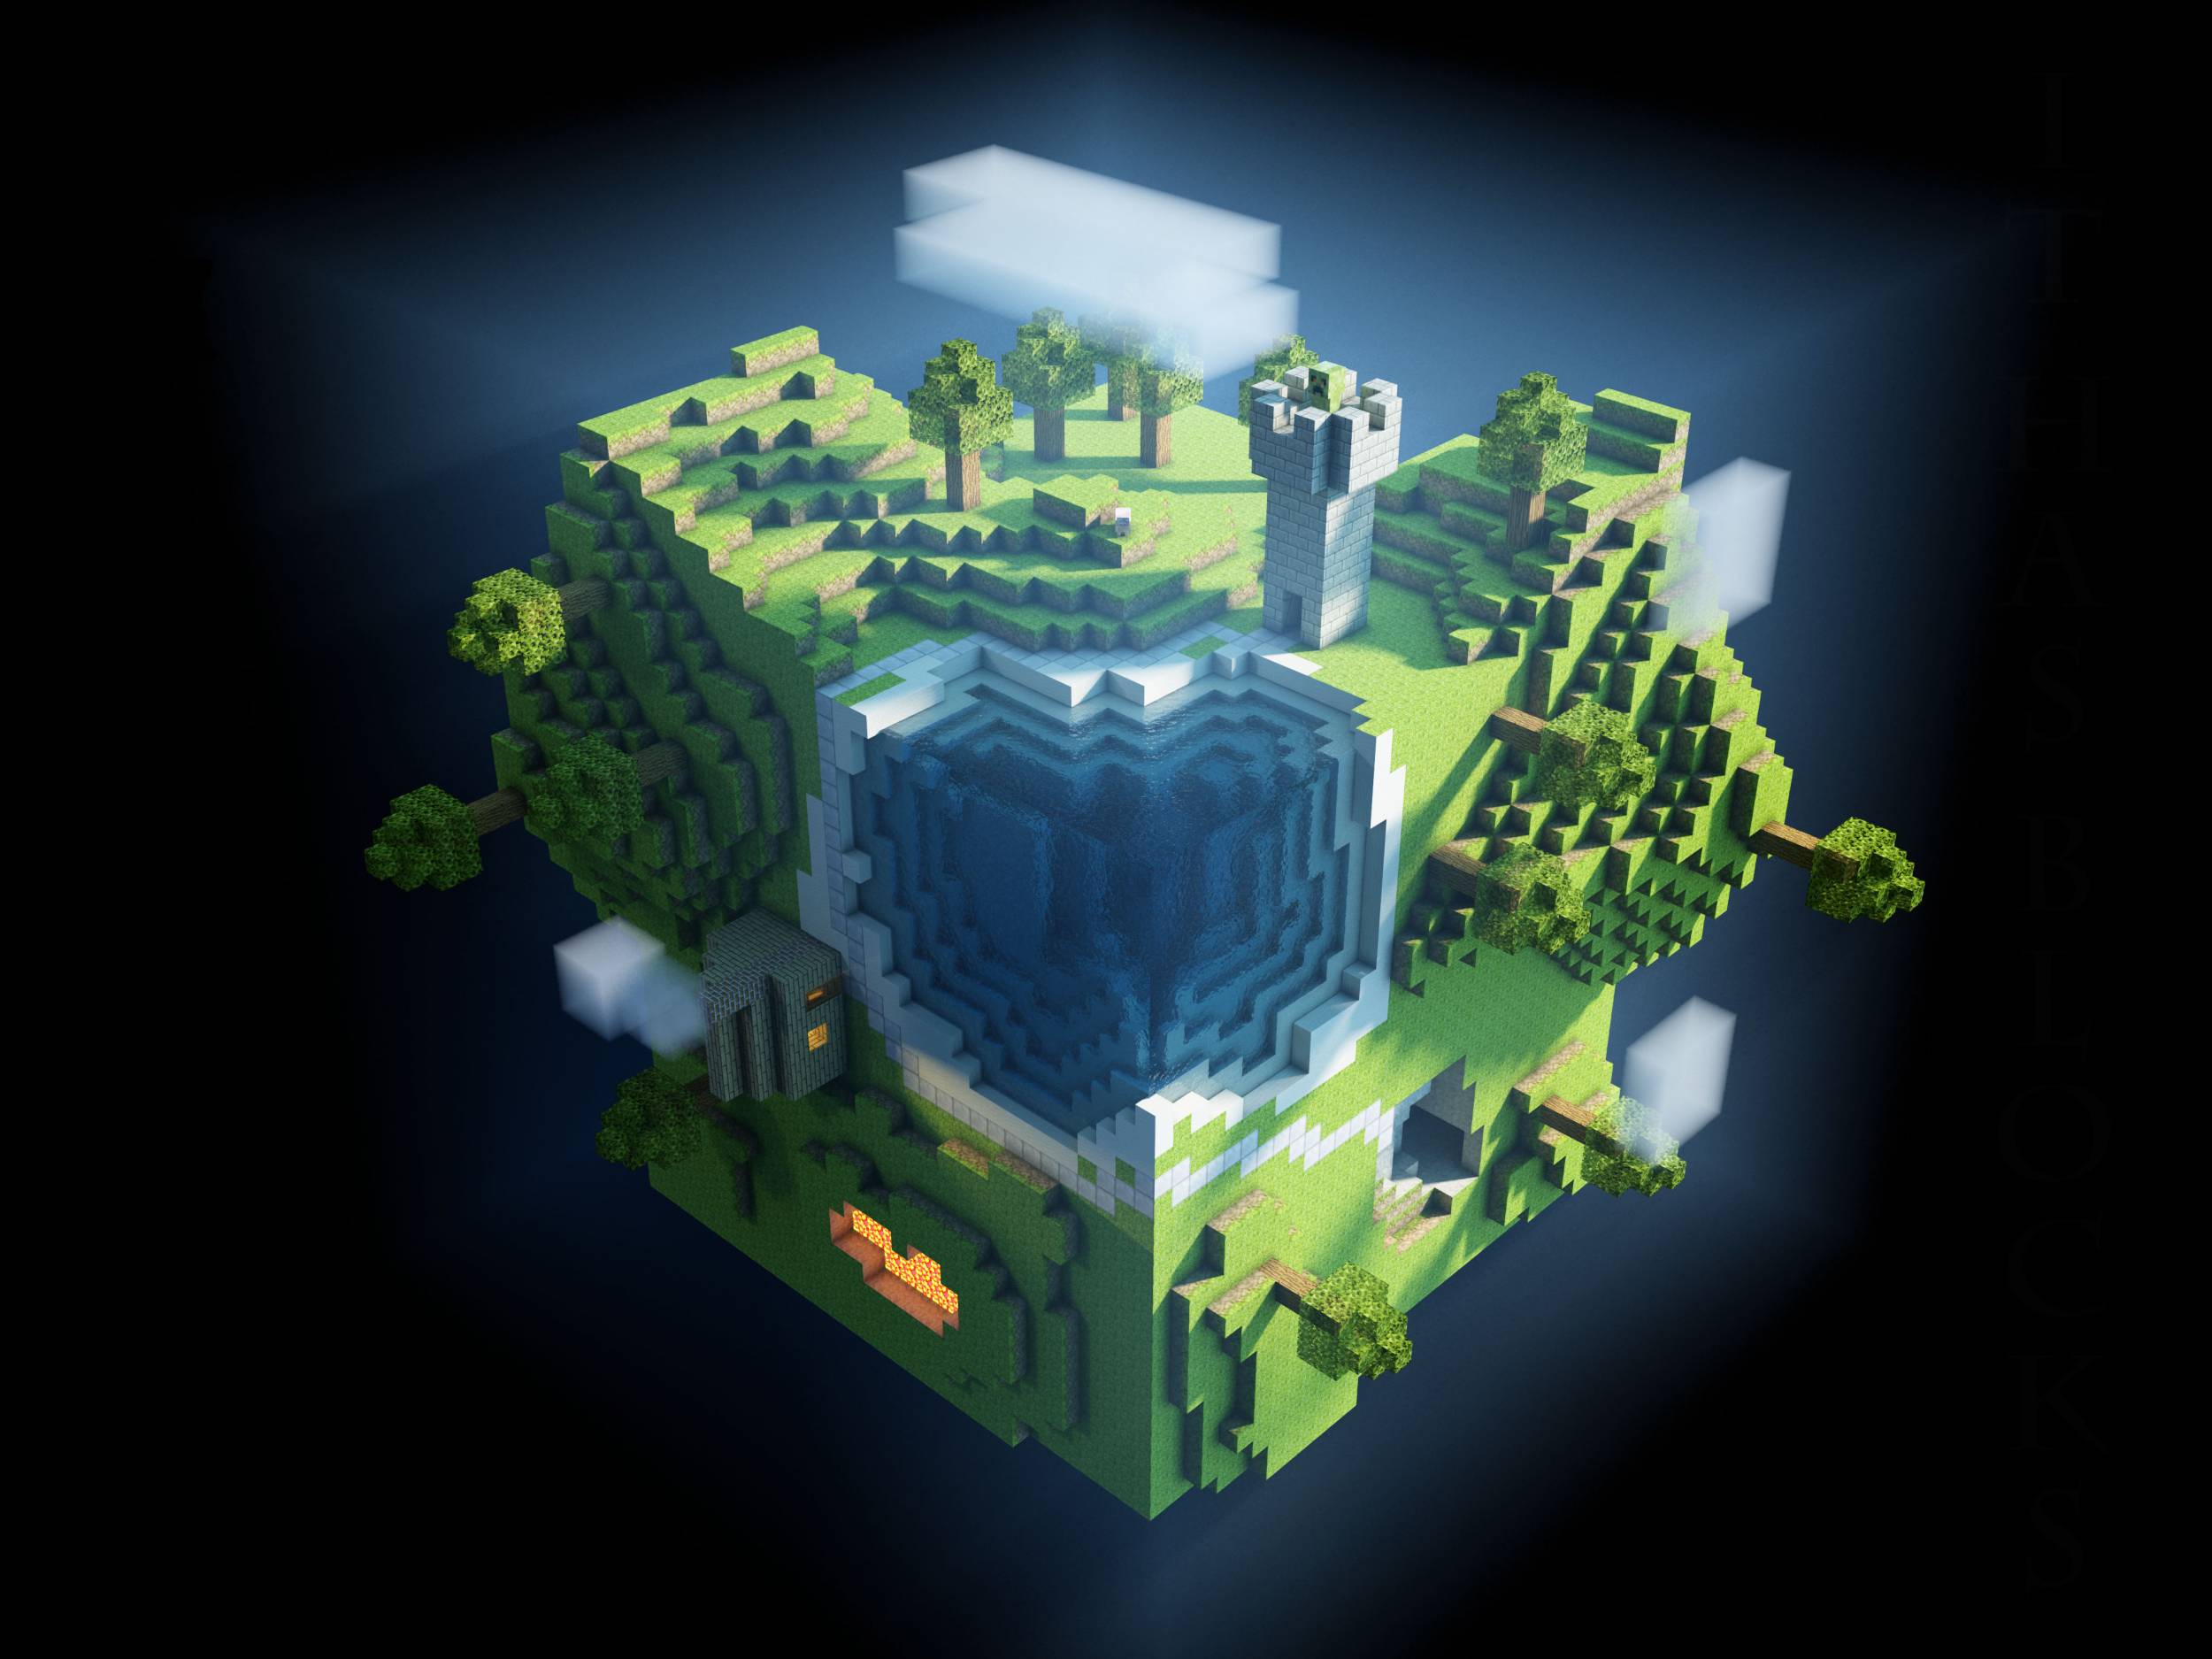 Cool Minecraft HD Wallpaper for PC & Mac, Tablet, Laptop, Mobile